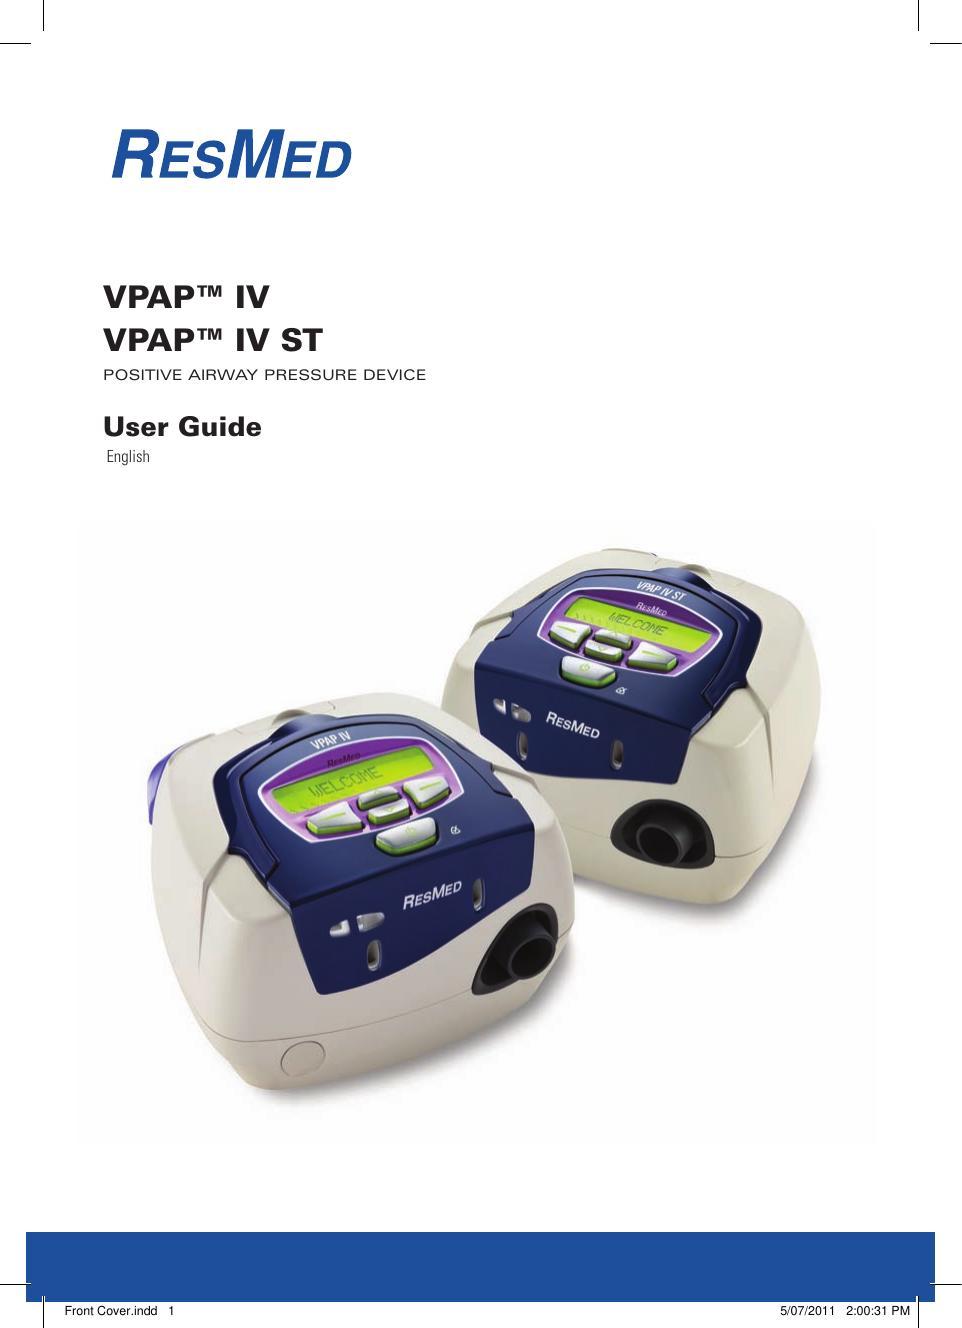 vpap-iv-vpap-iv-st-positive-airway-pressure-device-user-guide-english.pdf